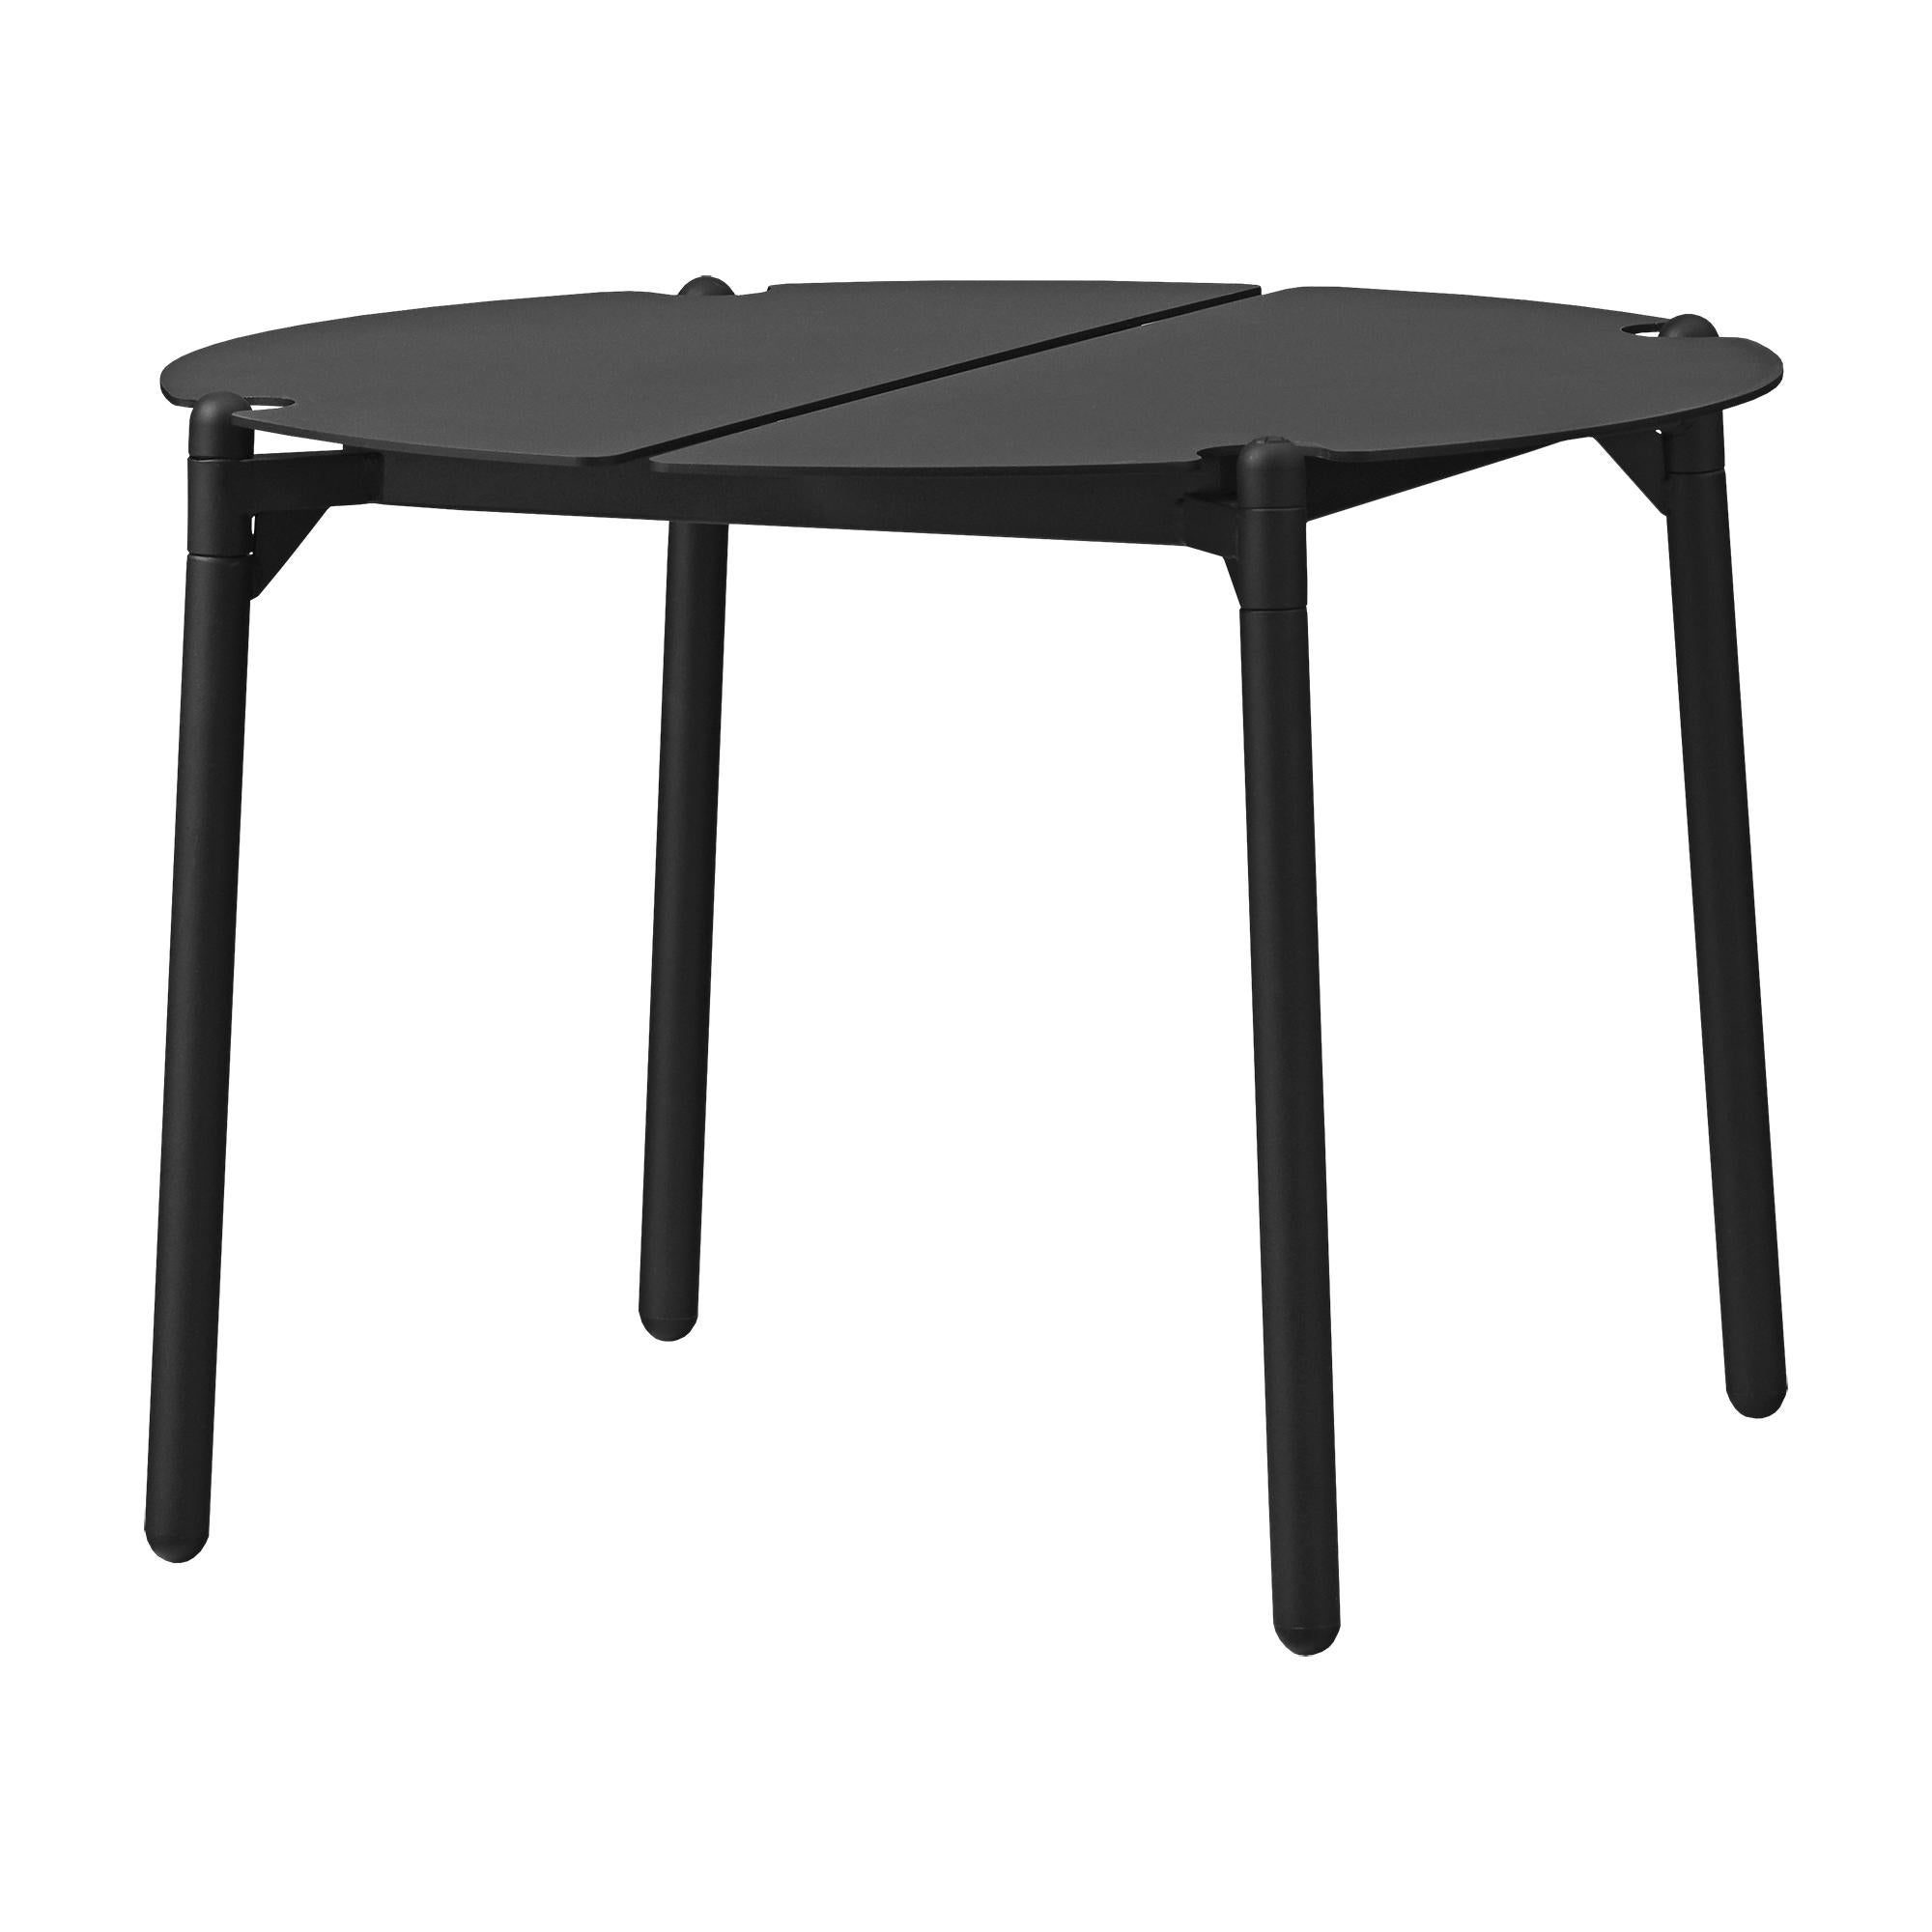 Small black Minimalist lounge table
Dimensions: diameter 50 x height 35 cm 
Materials: steel w. matte powder coating & aluminum w. matte powder coating.
Available in colors: taupe, bordeaux, forest, ginger bread, black and, black and gold.

Place